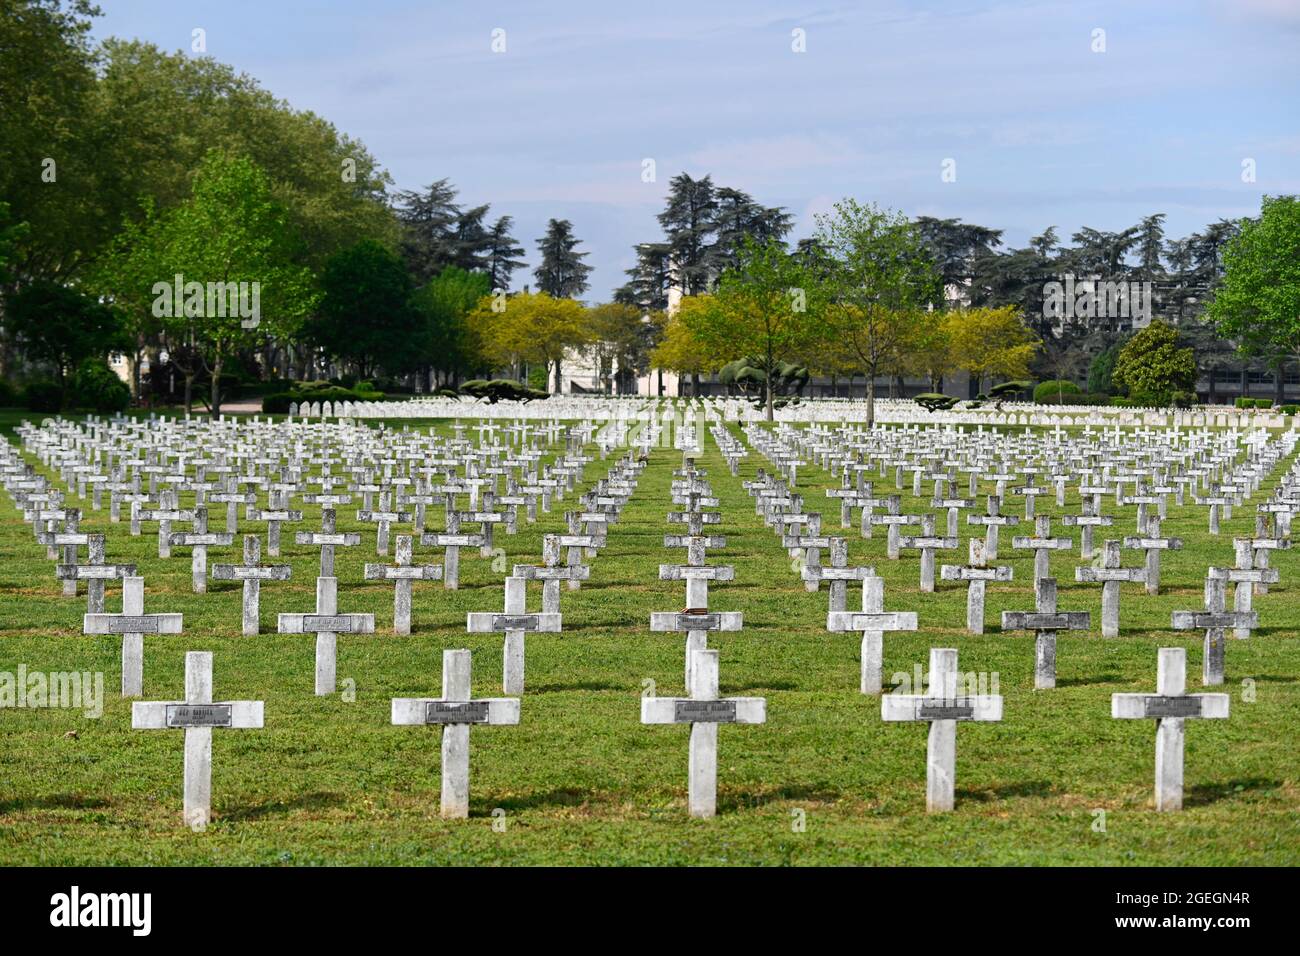 Villeurbanne (central eastern France): the National Military Necropolis or Cemetery of La Doua gathers graves of soldiers or the Resistance, French or Stock Photo